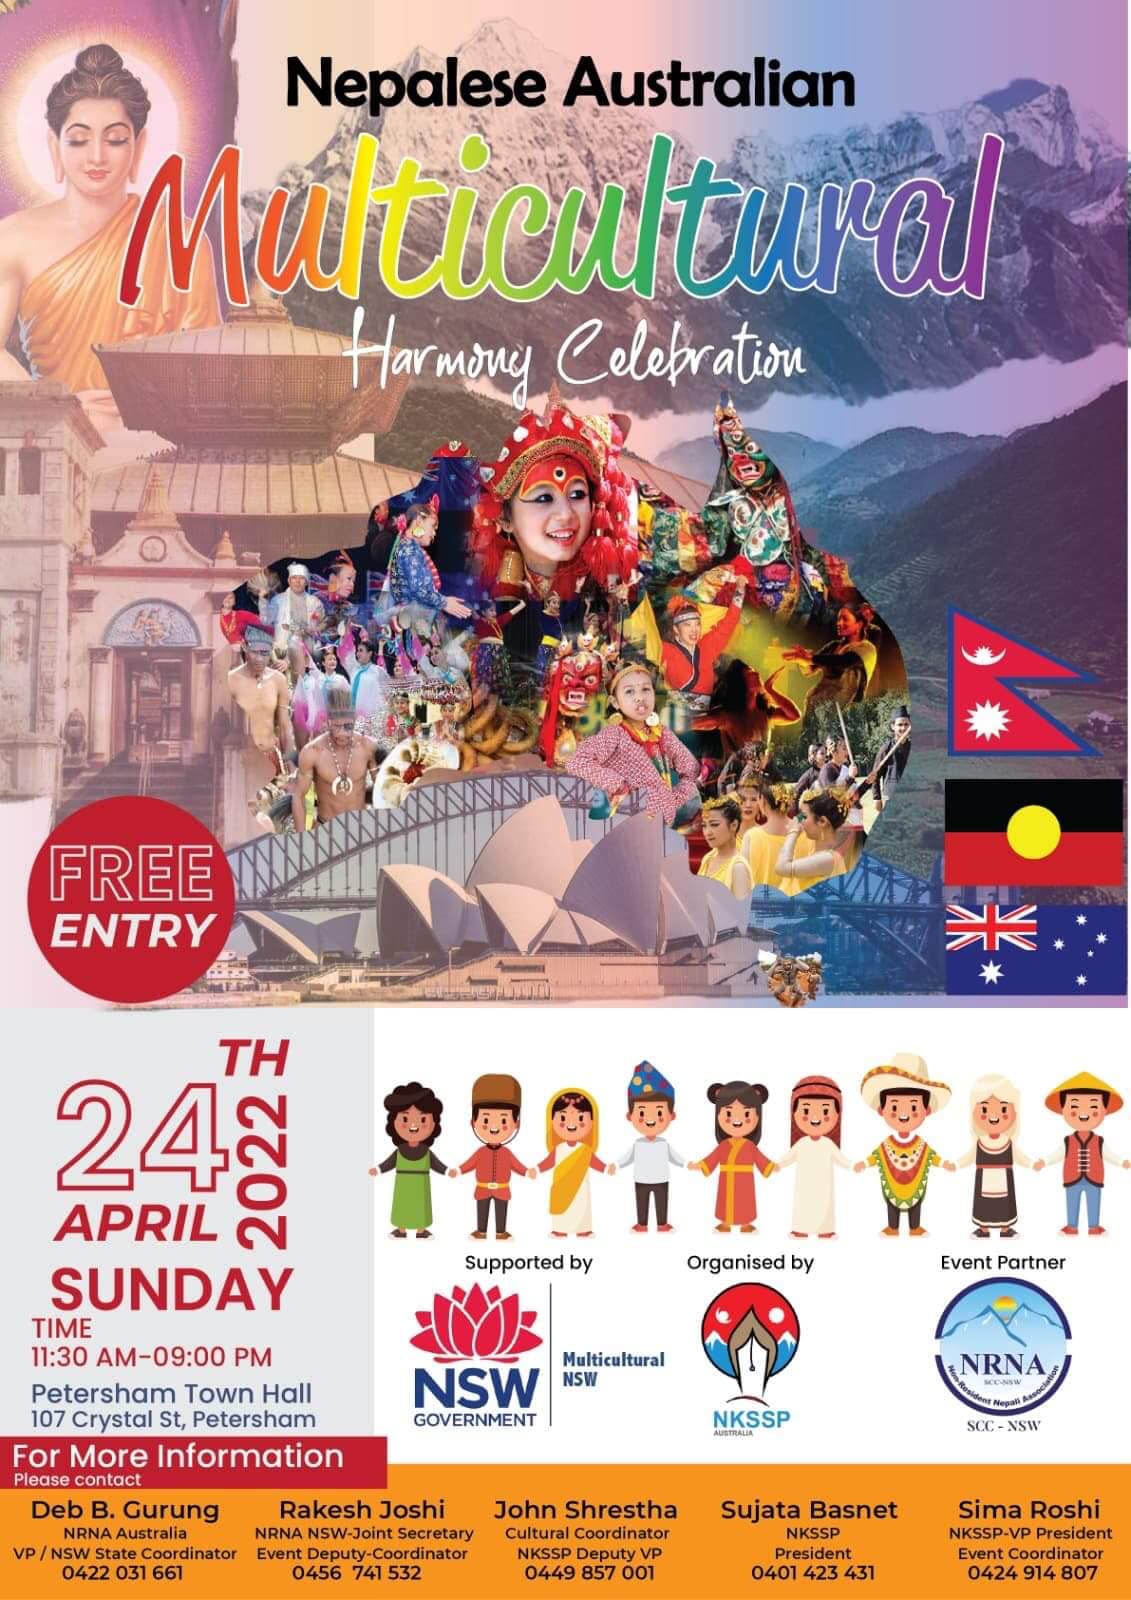 Nepali Kala Sanskriti tatha Sahitya Pratisthan (NKSSP) is holding an event “Nepalese Australian Multicultural Harmony Celebration” with the assistance of the Australian Government and NRNA, NSW, SCC on 24th April 2022 at Petersham Town Hall, NSW.